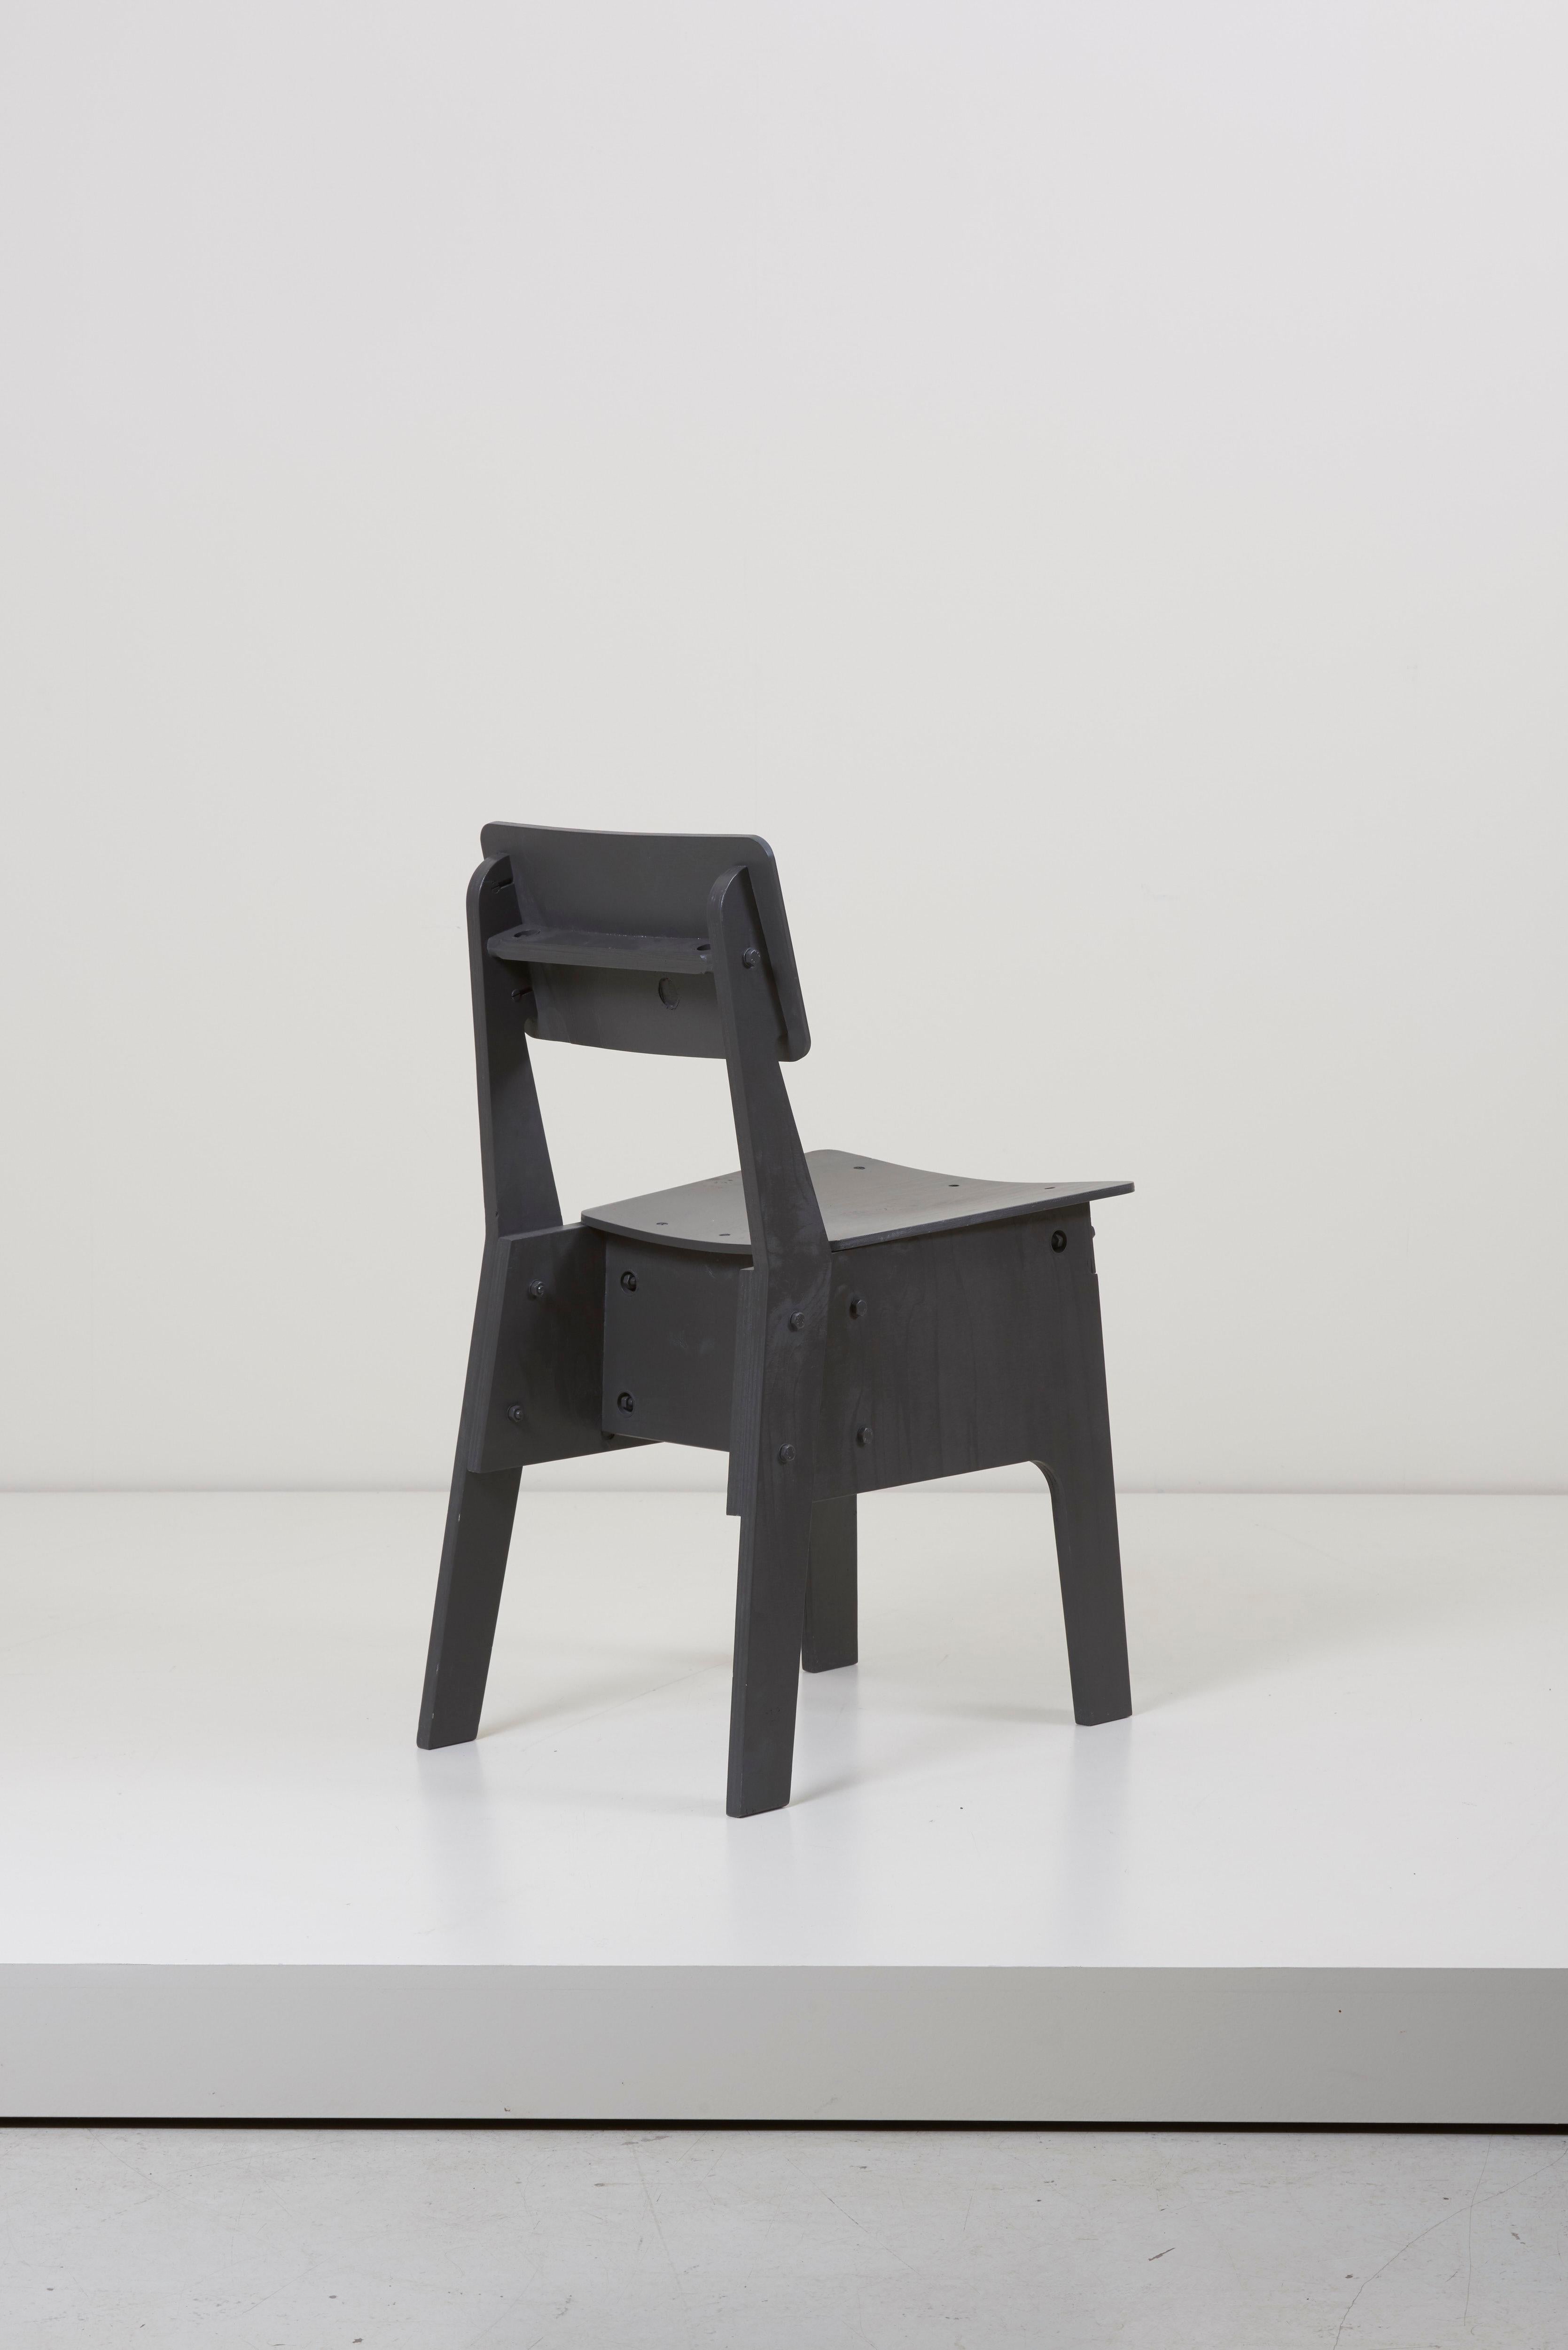 1 of 3 Crisis Chairs by Piet Hein Eek in Plywood 4